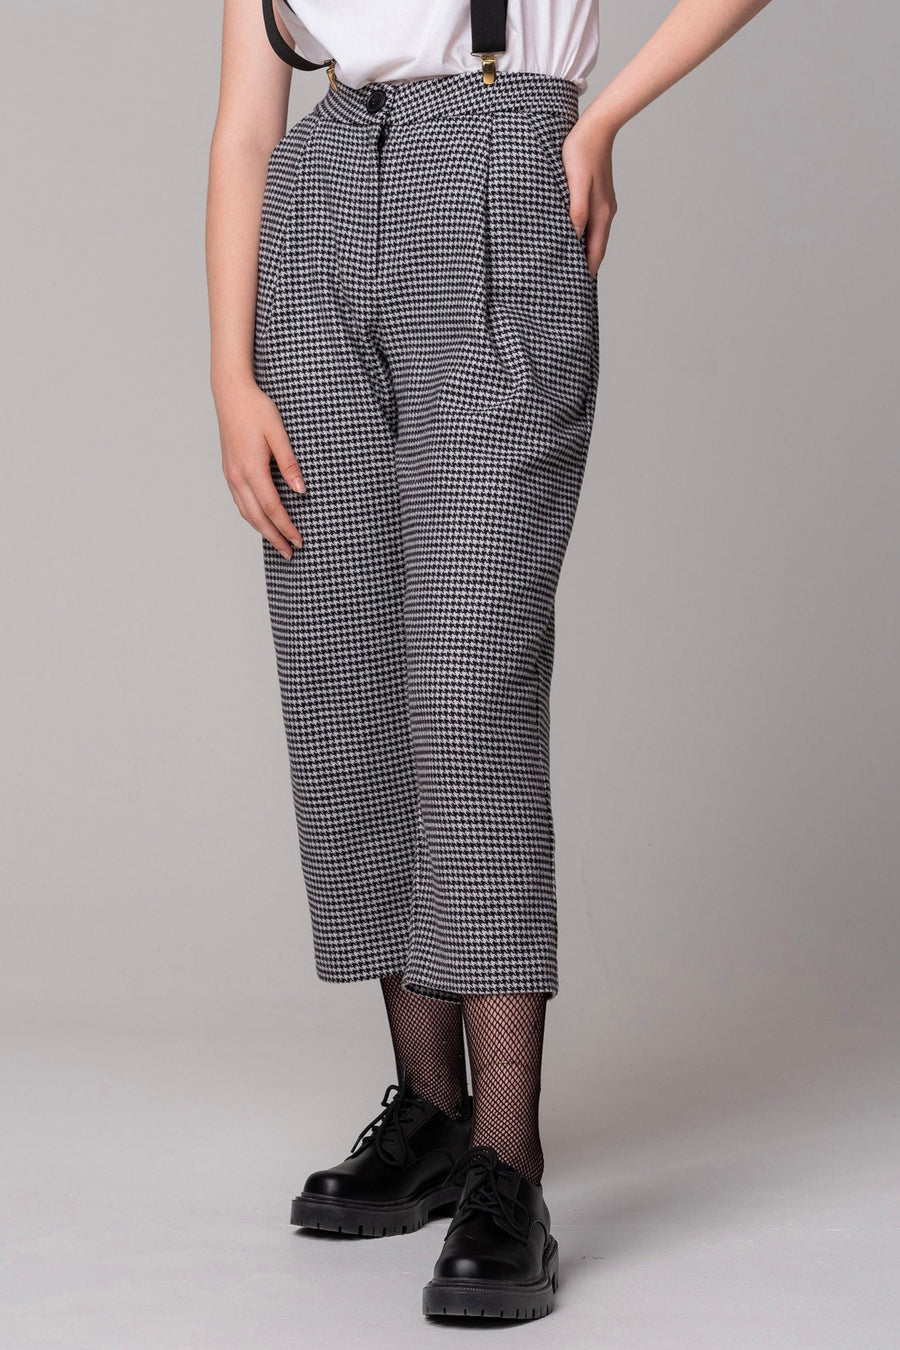 SAMPLE | Skyler Pants Houndstooth Upcycled | XS